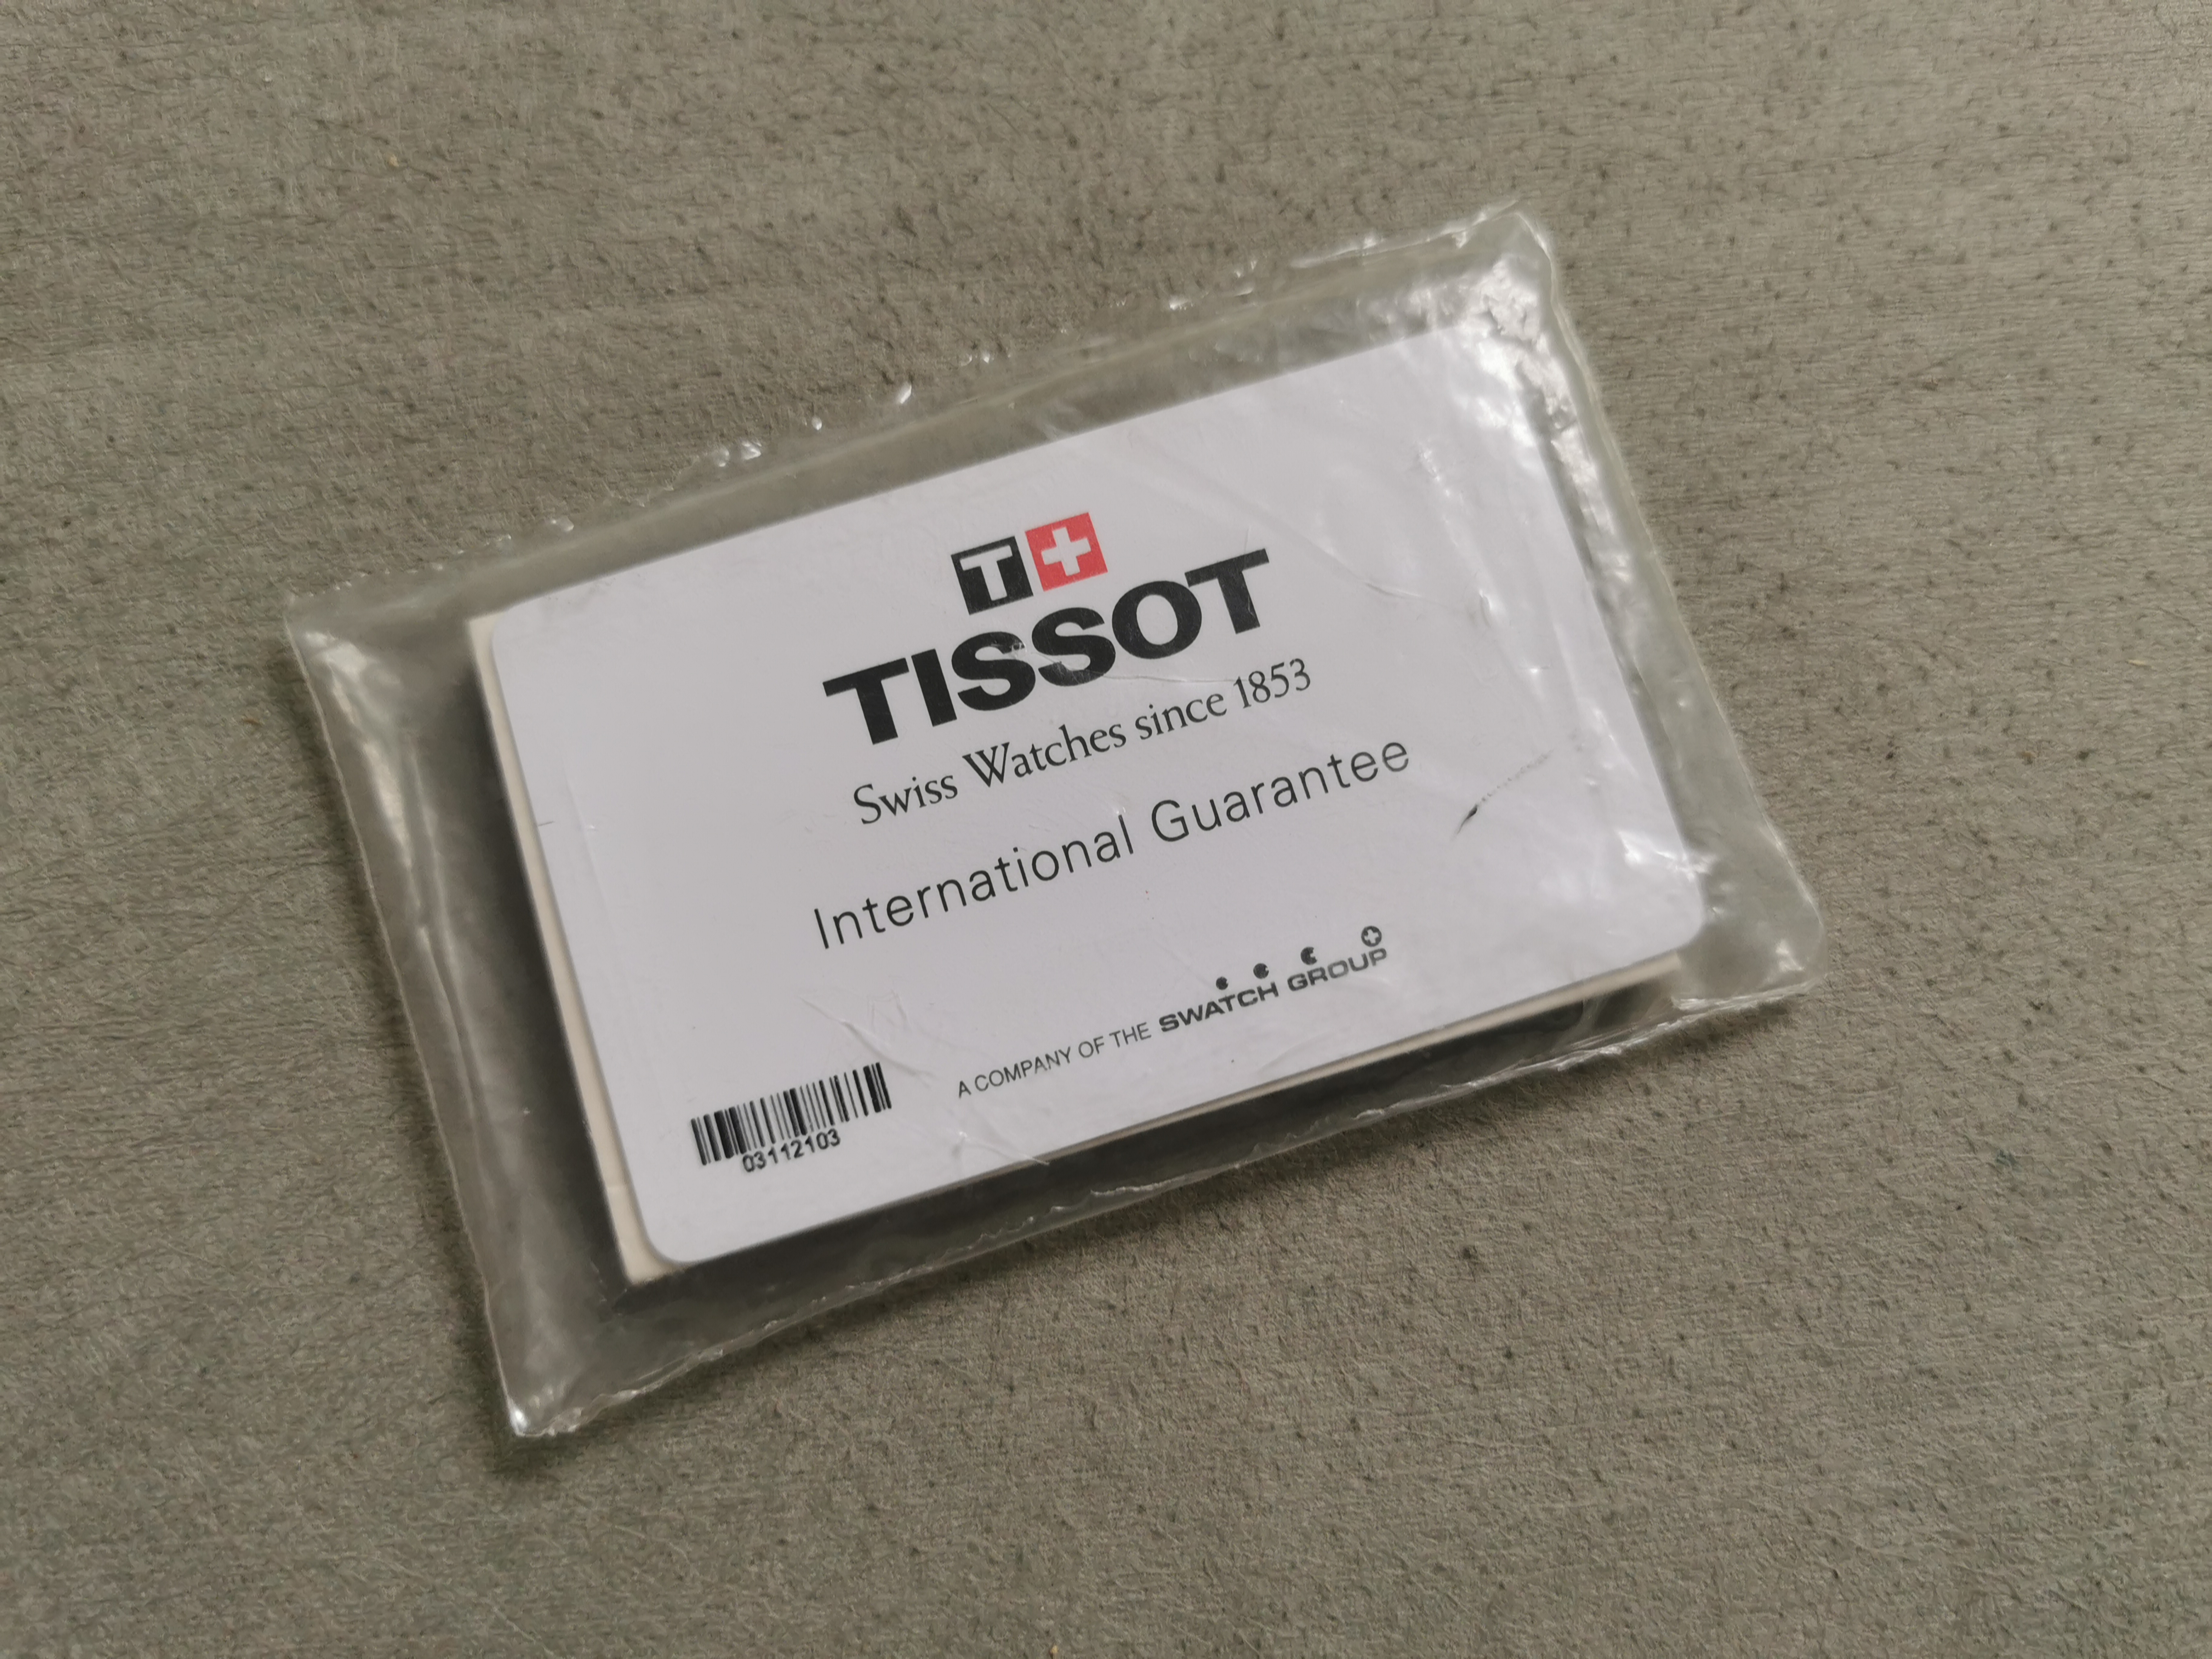 Tissot warranty card blank and instruction booklet analog watches new in blister | San Giorgio a Cremano